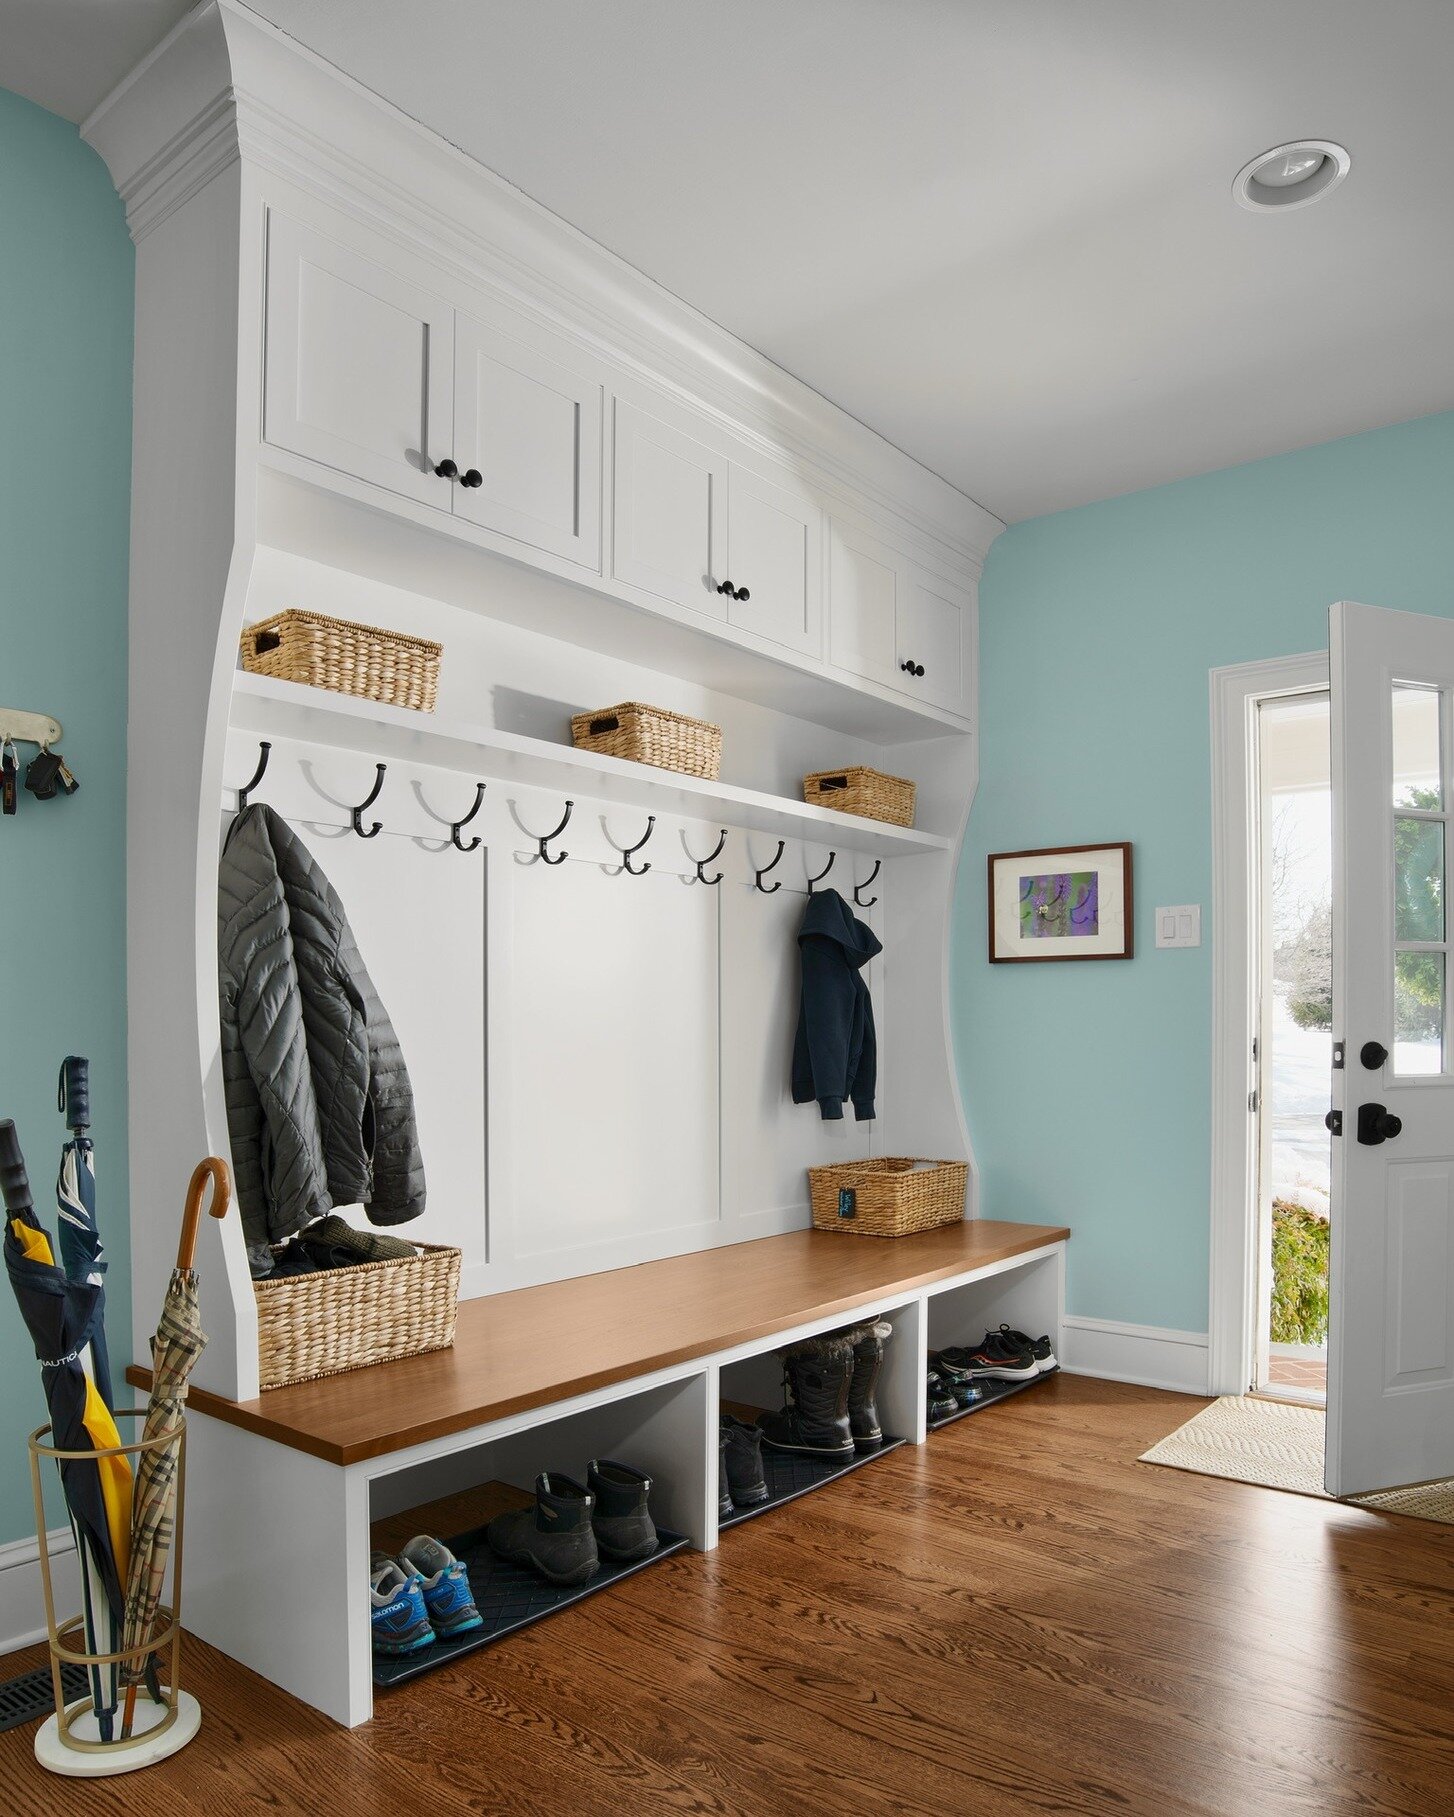 If you were creating your own entry space, what would be most important to you?  Enclosed storage?  Individual cubbies?  Seating?  Shoe storage?  Drop comment 👇

.
.
.
#entryway #mudroom #mudrooms #mudroominspo #mudrombench #entrywaydecor #entry #en